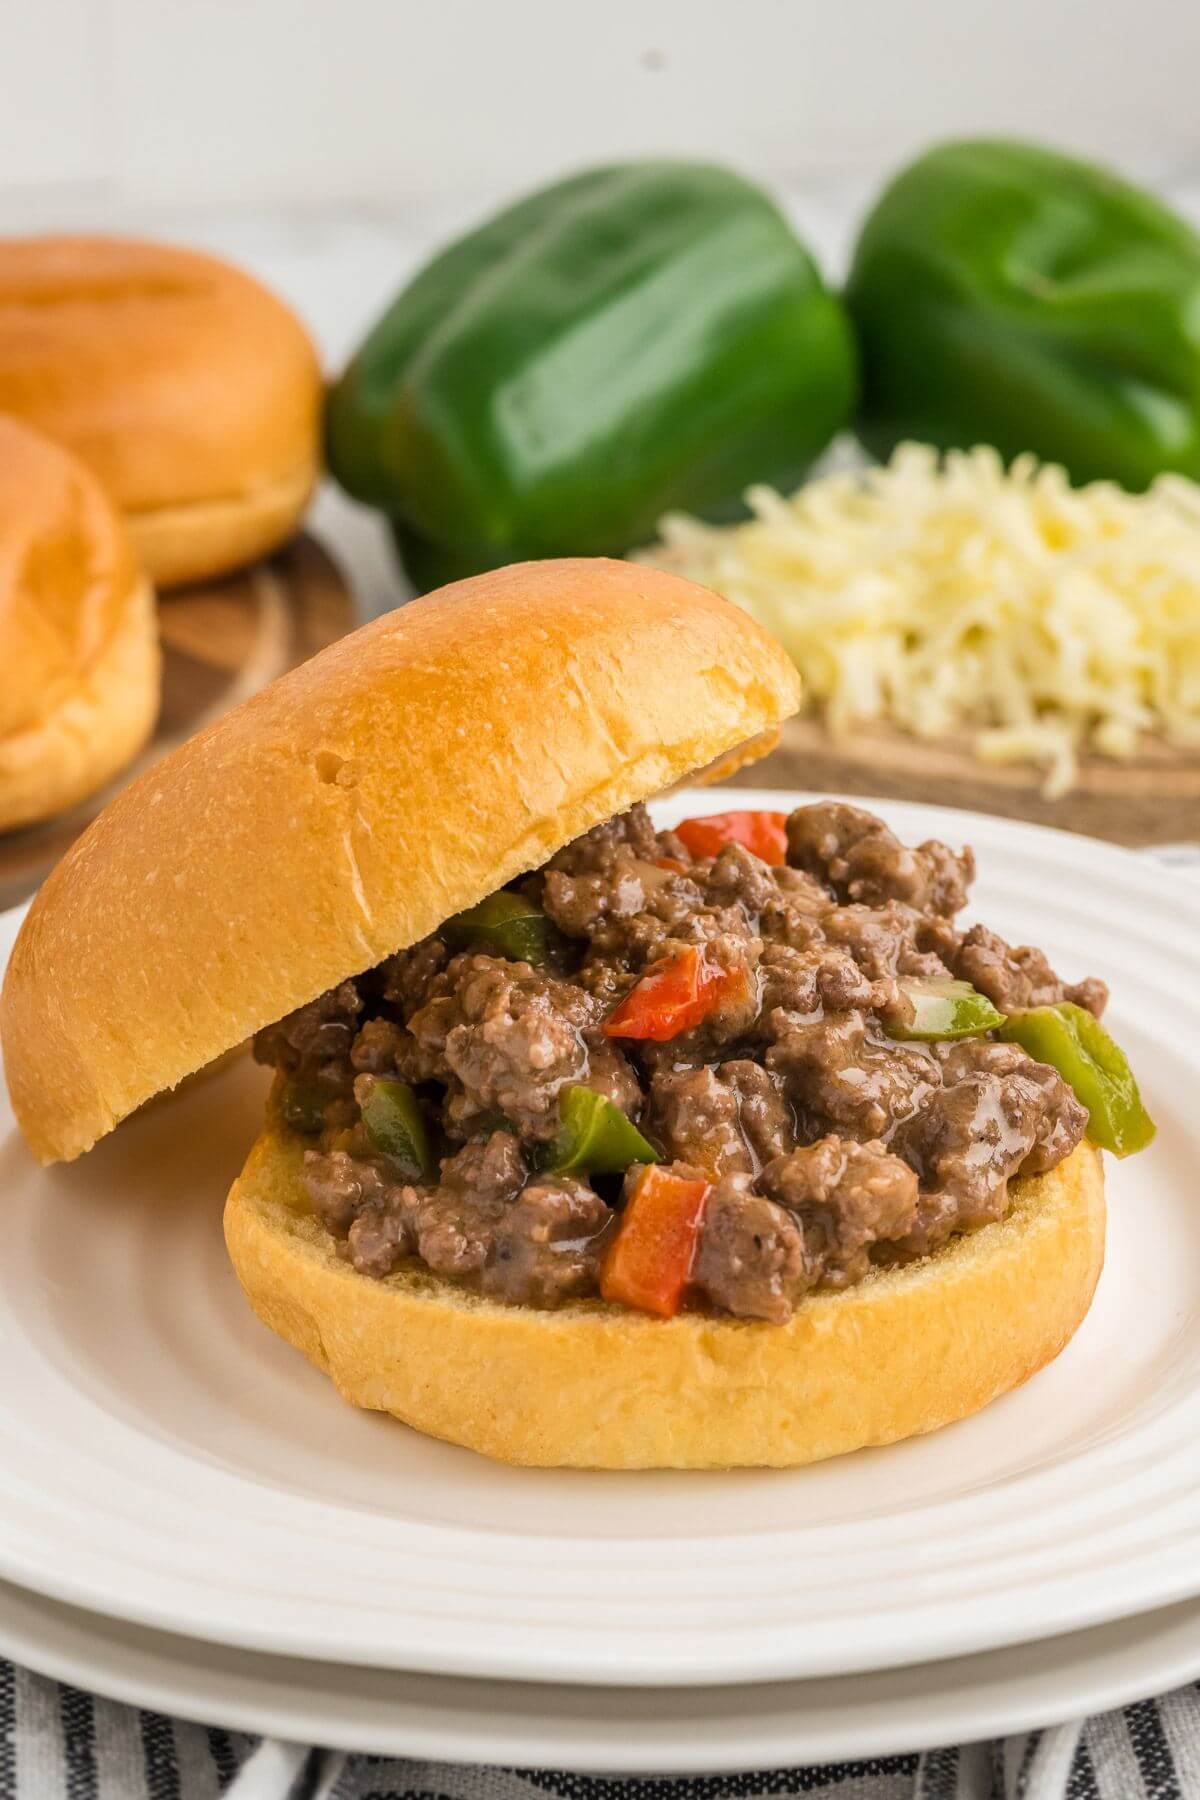 Extra bell peppers, cheese, and buns are behind a full and meaty sandwich with its bun tilting back.